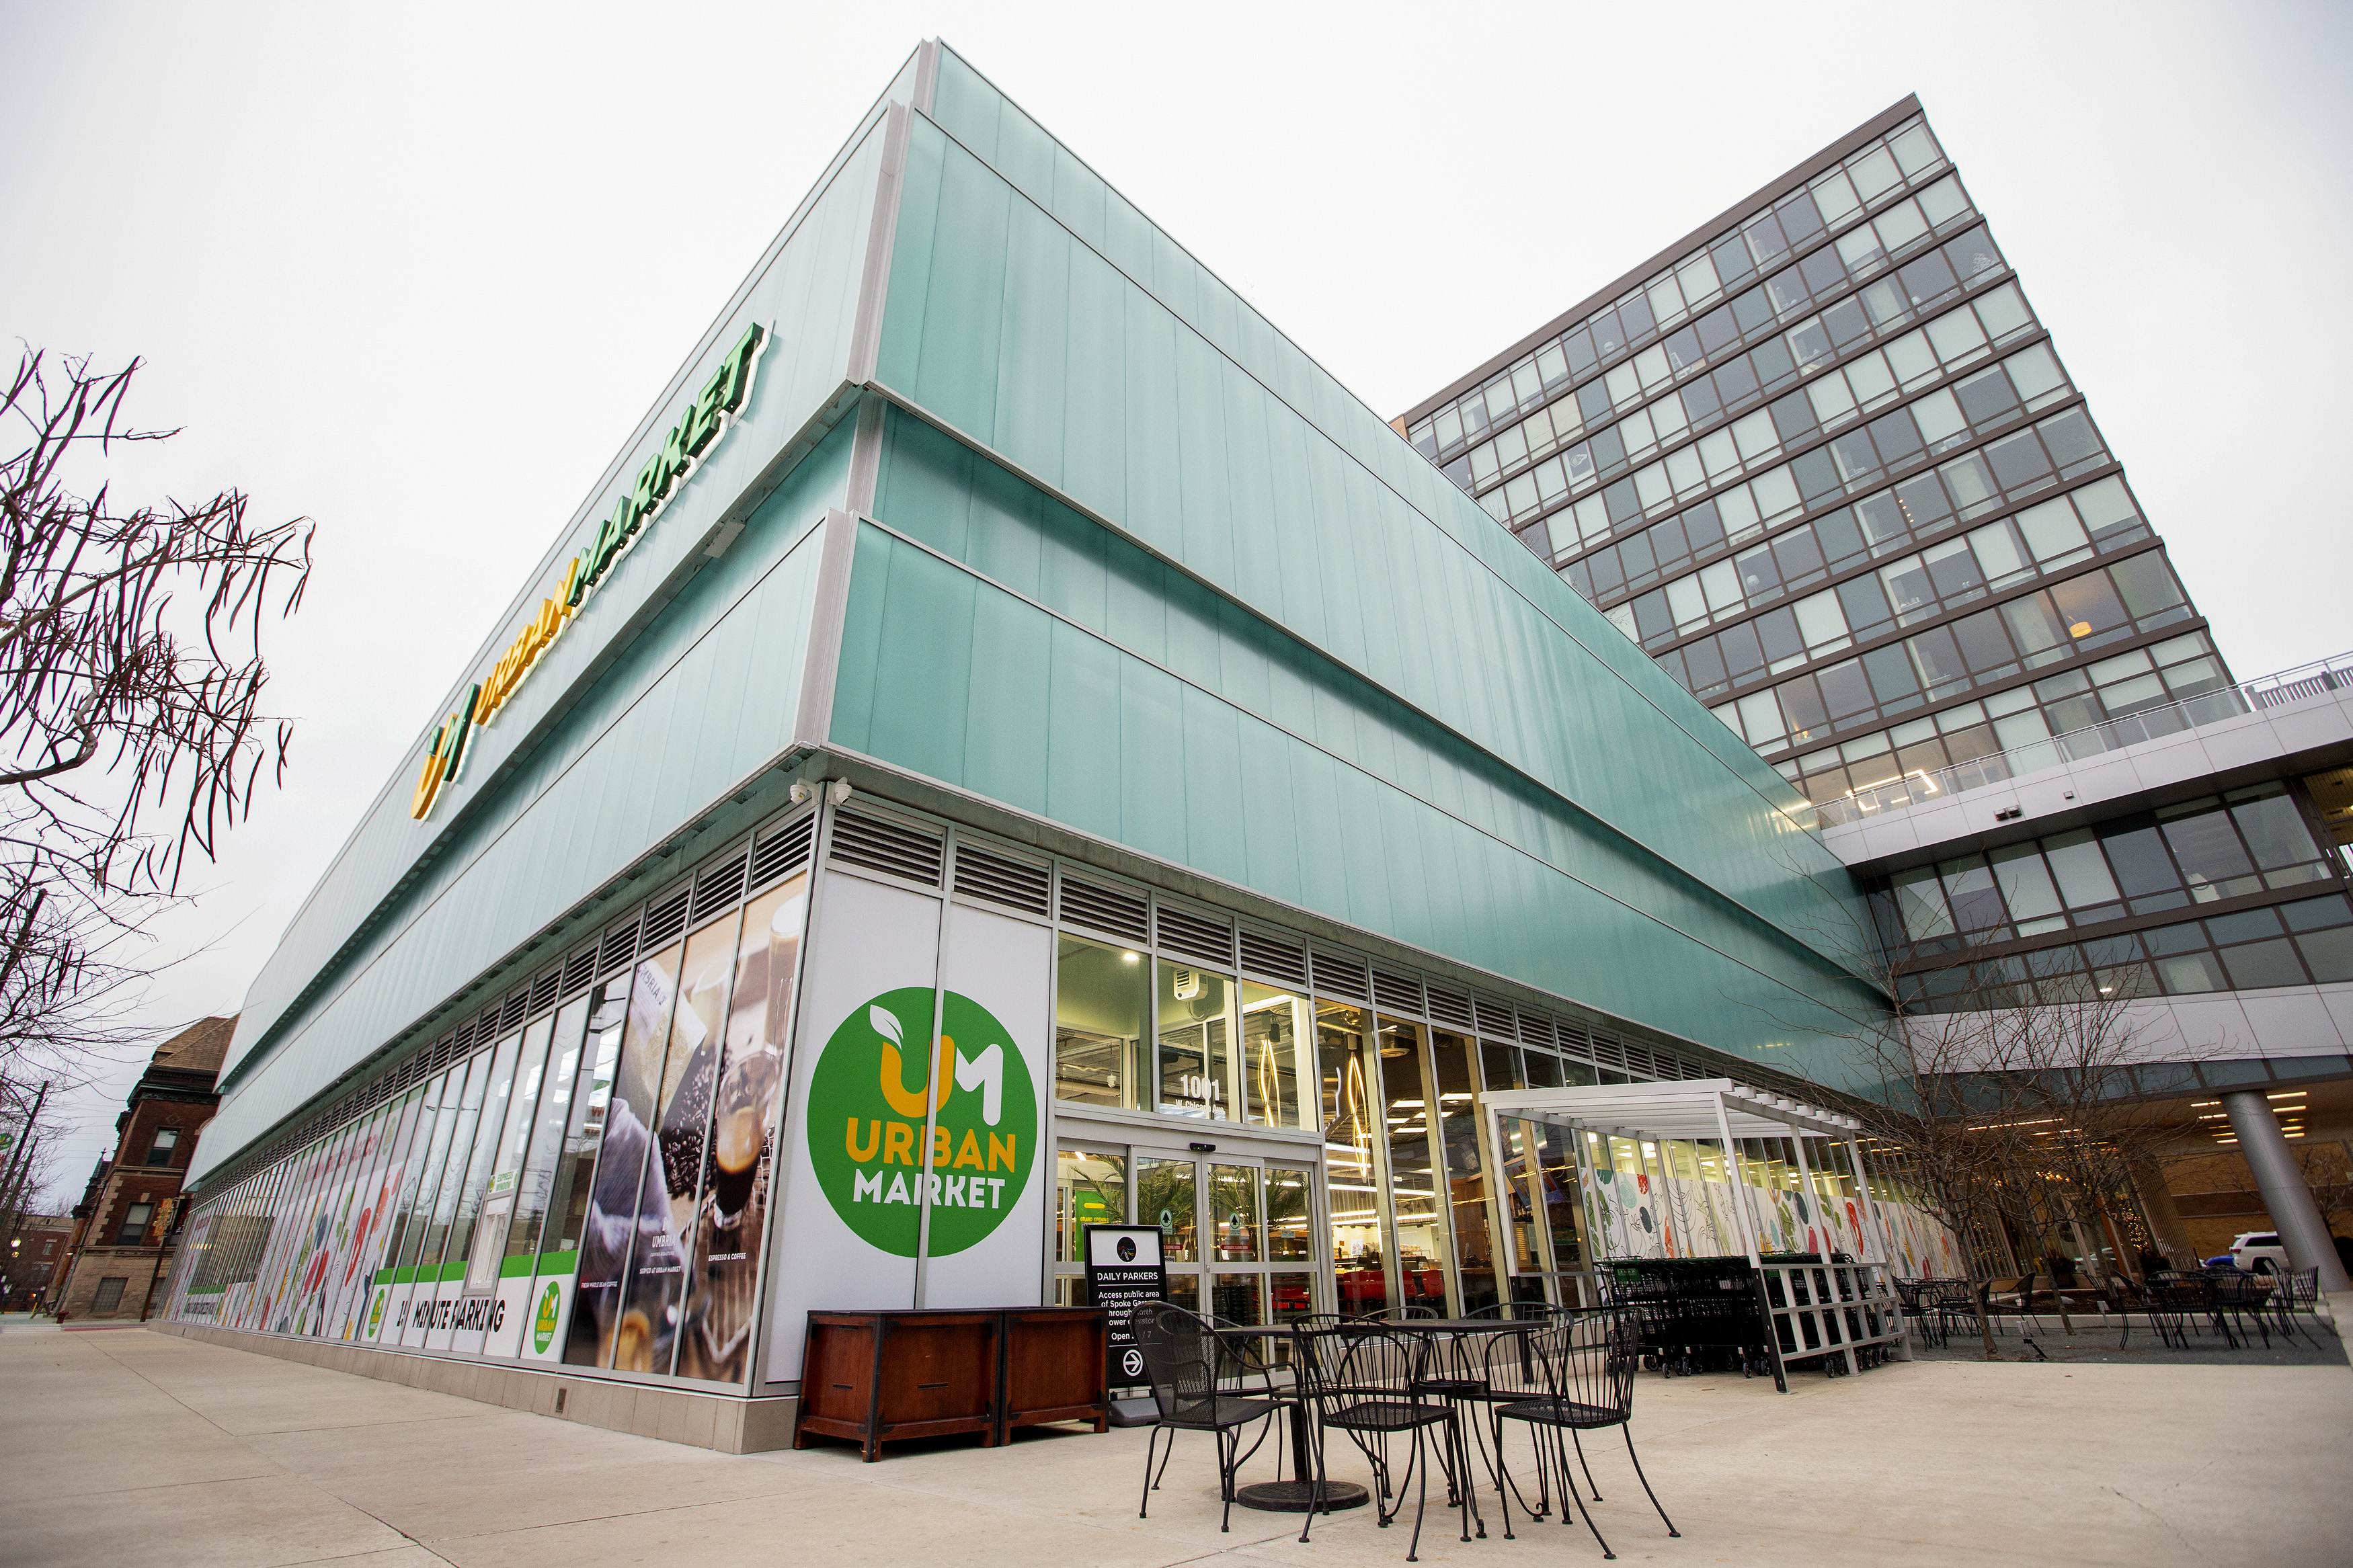 A large grocery store with a green top photographed from the street.